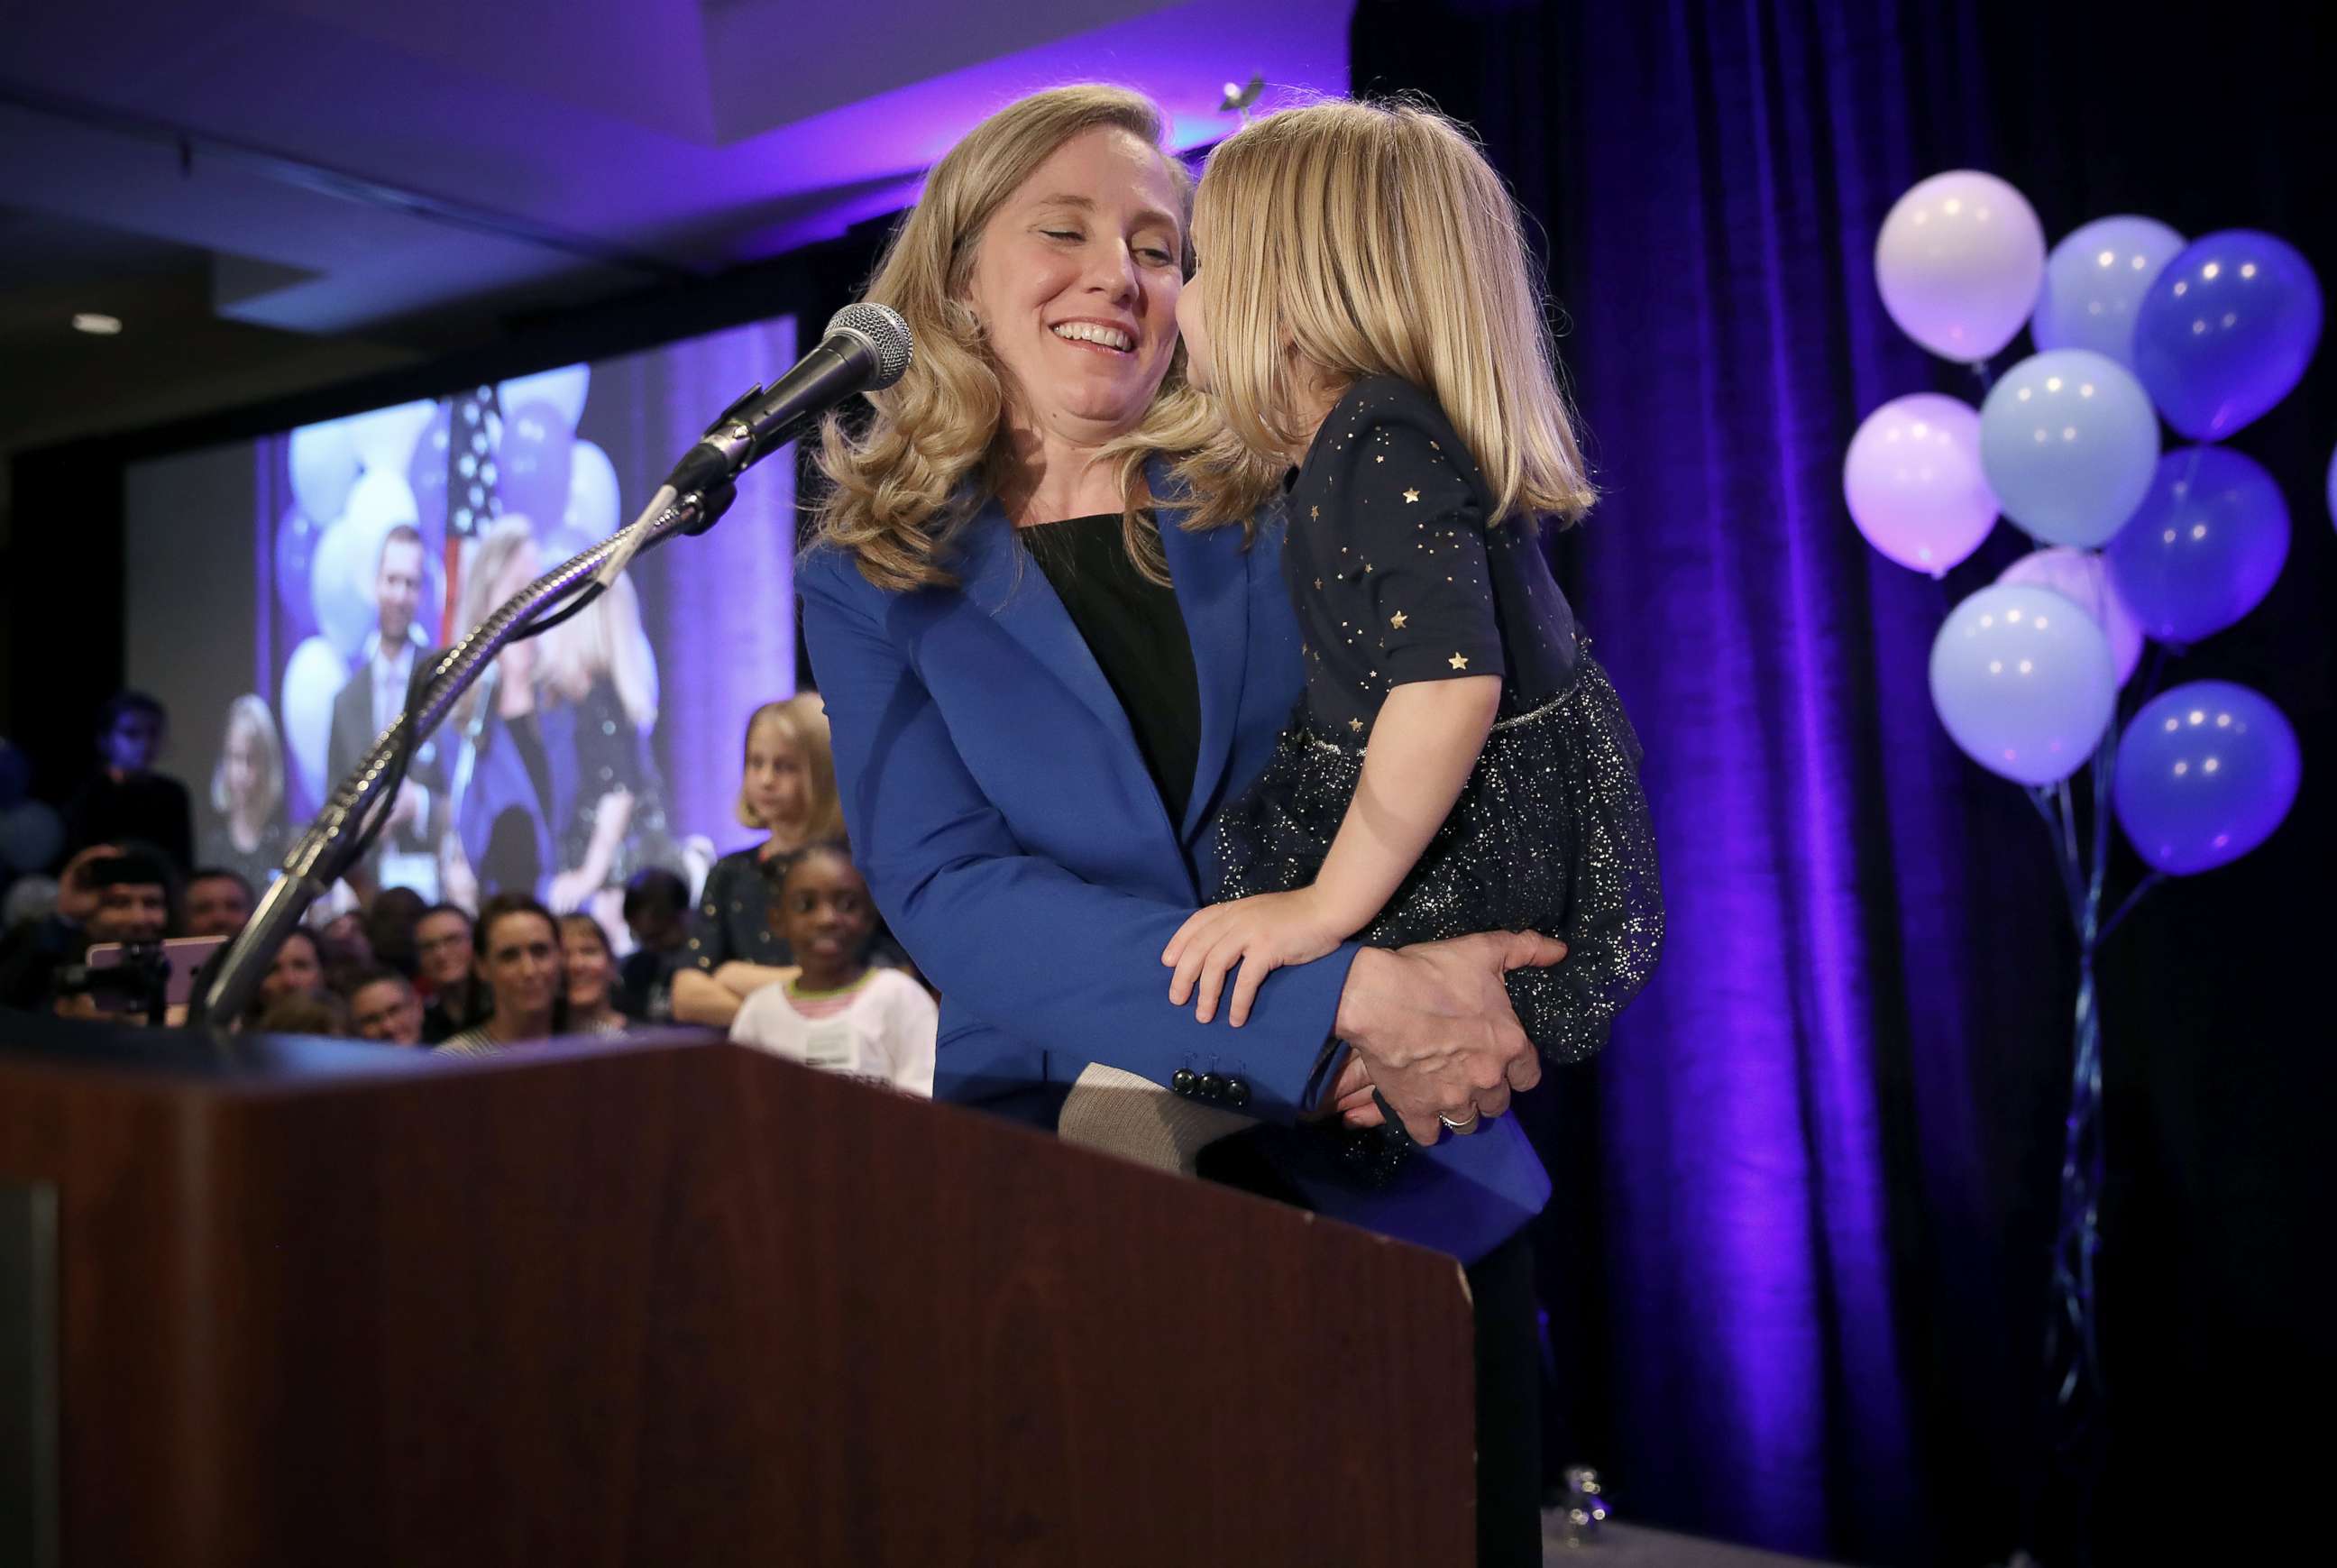 PHOTO: Abigail Spanberger, democratic candidate for Virginia's Seventh District, holds her daughter Catherine as she thanks supporters at an election night rally, Nov. 6, 2018, in Richmond, Virginia.